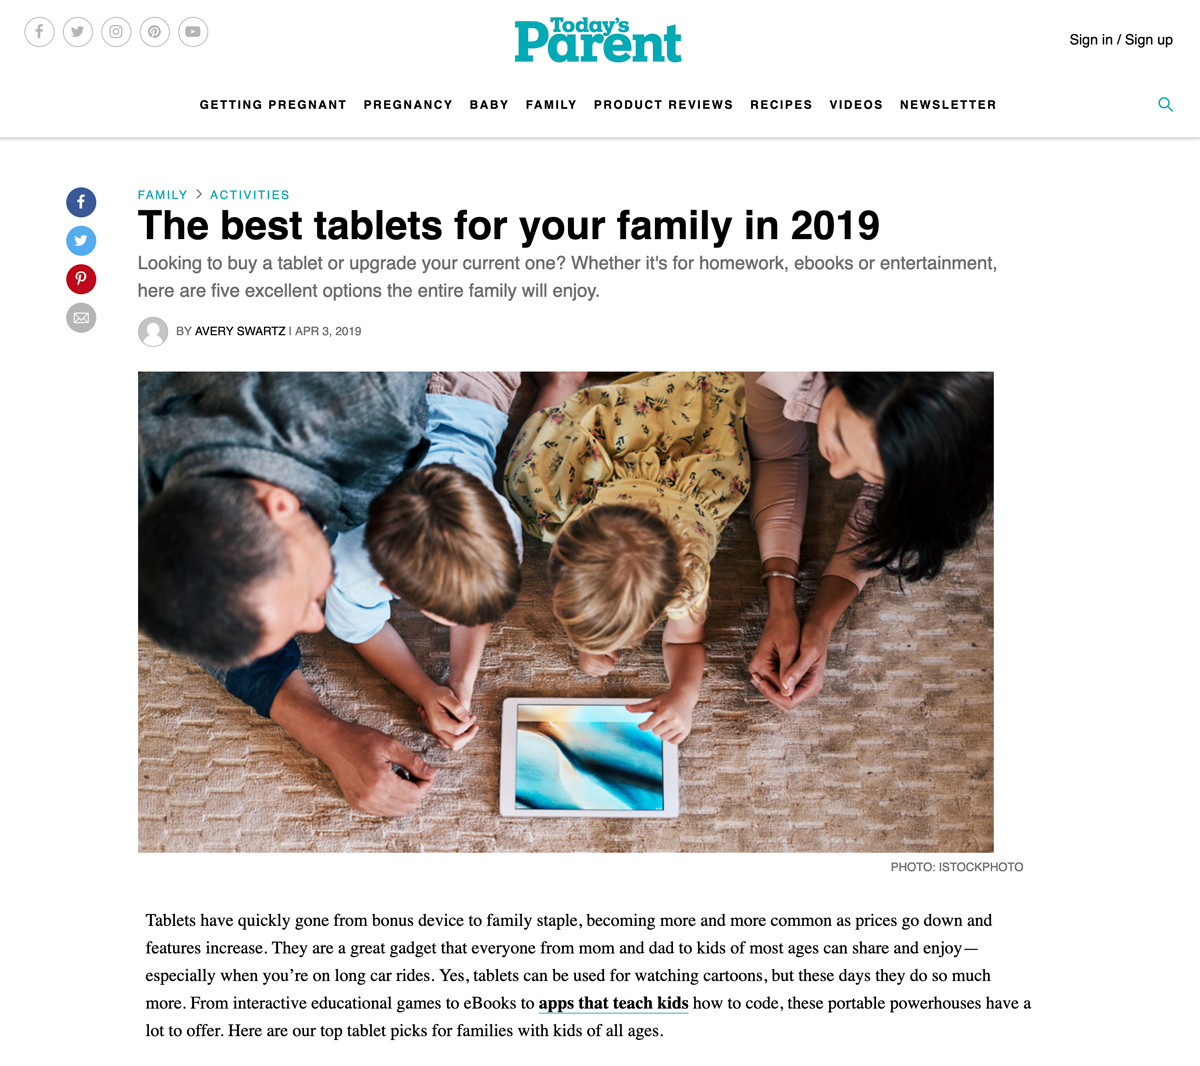 The best tablets for your family in 2019